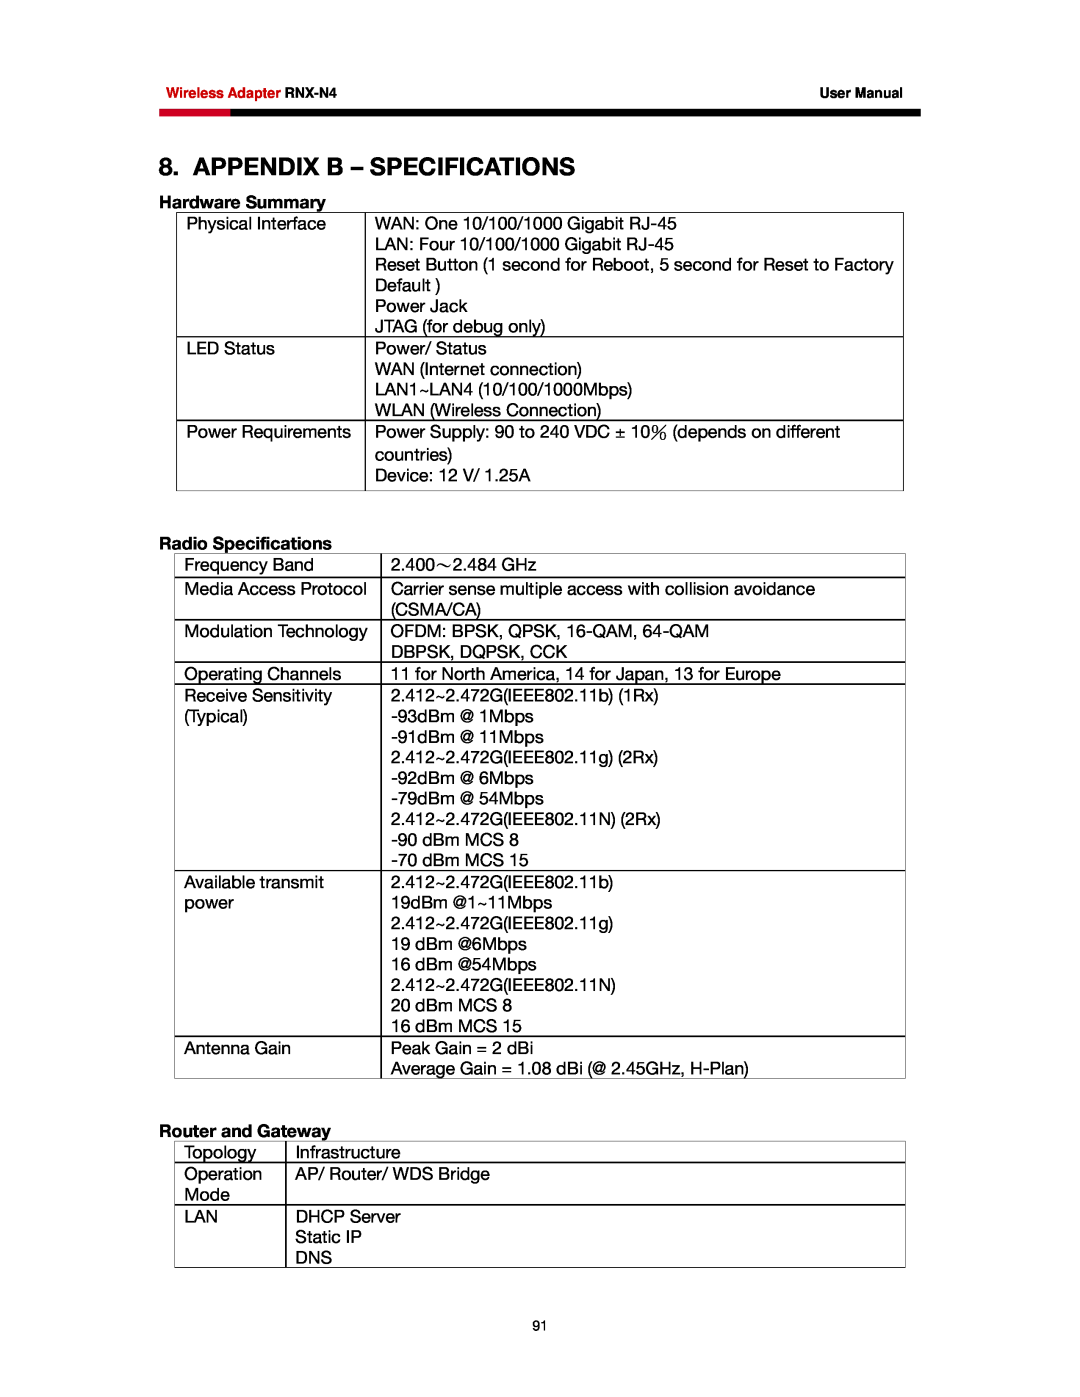 Rosewill RNX-N4 user manual Appendix B - Specifications, Hardware Summary, Radio Specifications, Router and Gateway 